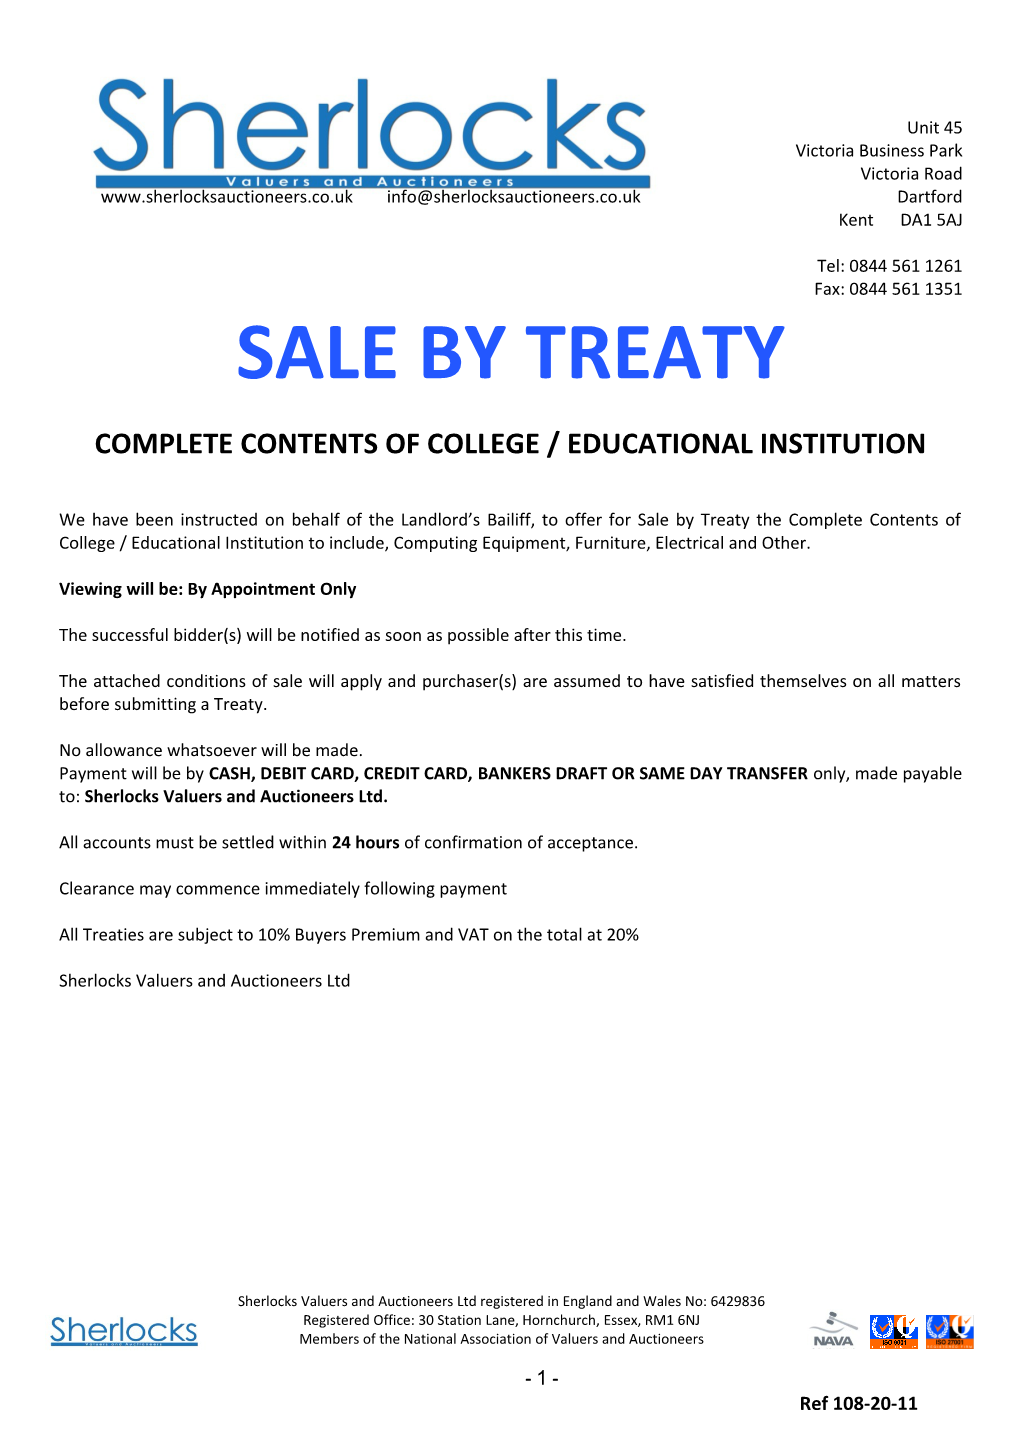 Complete Contents of College / Educational Institution